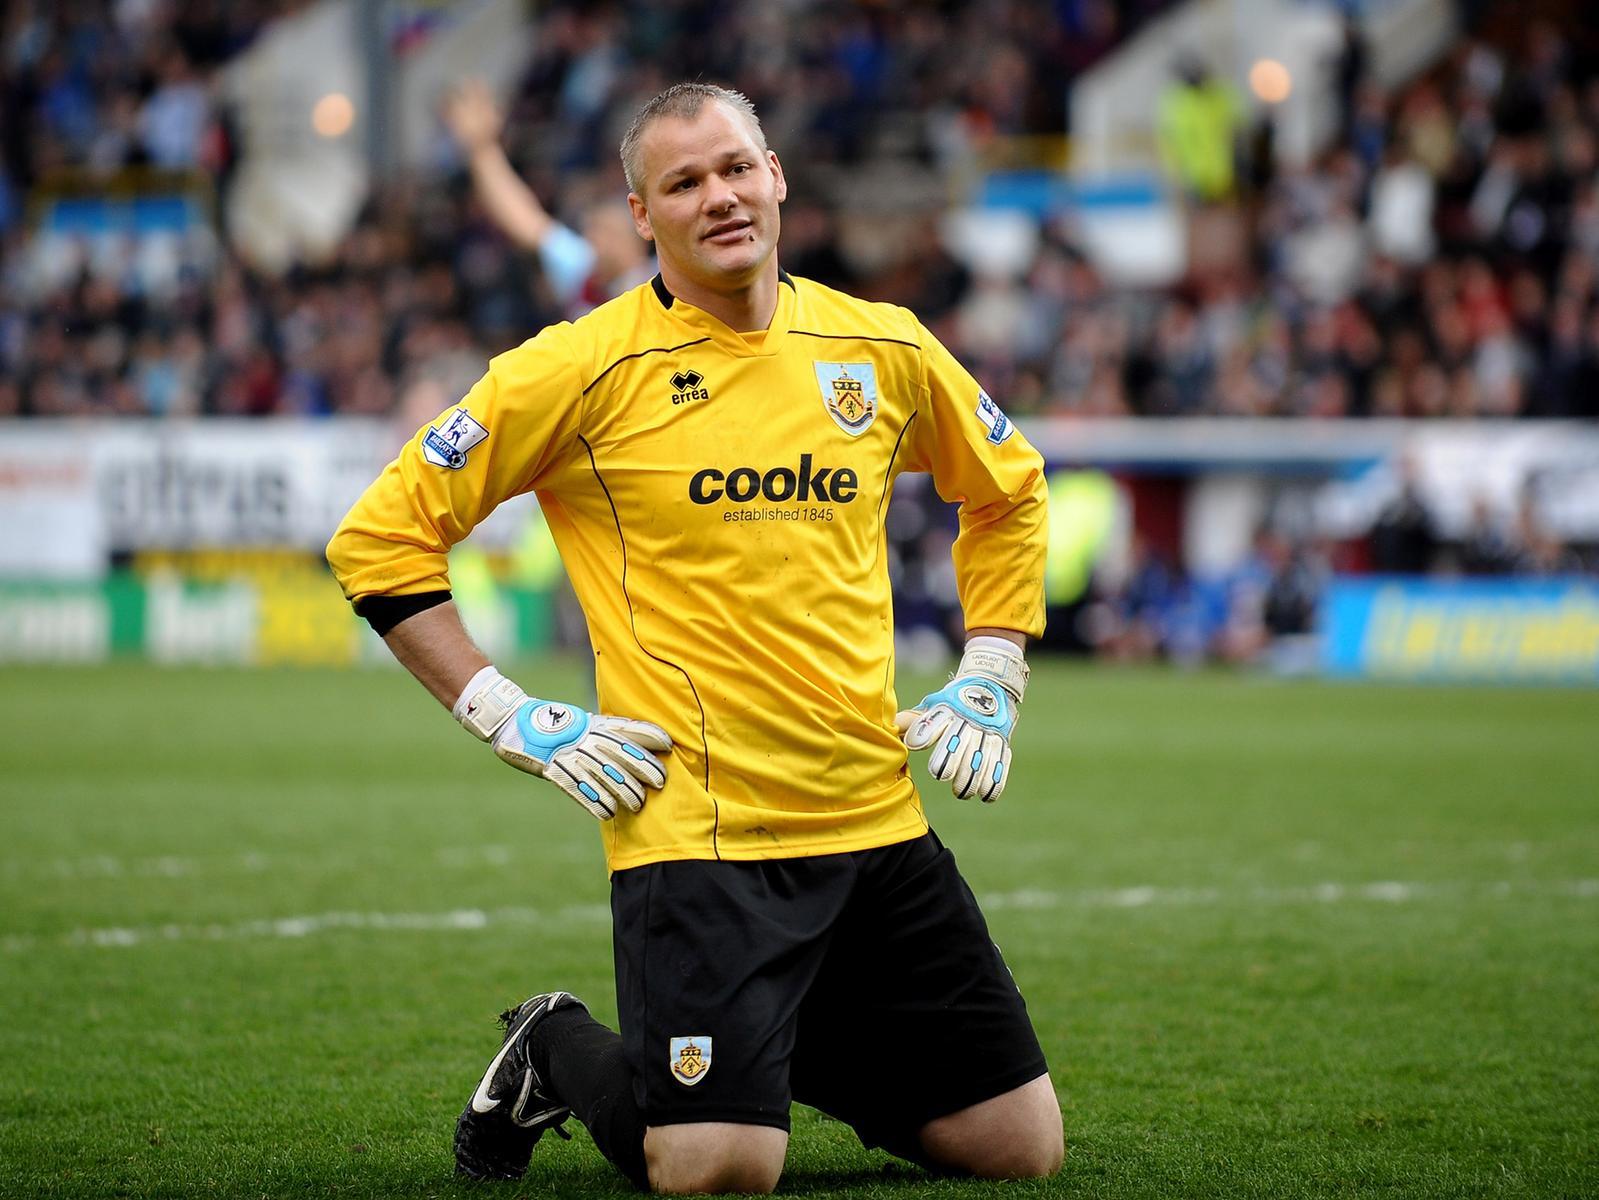 On 21 June 2019, Jensen joined the backroom staff as goalkeeping coach at League One side Shrewsbury Town.